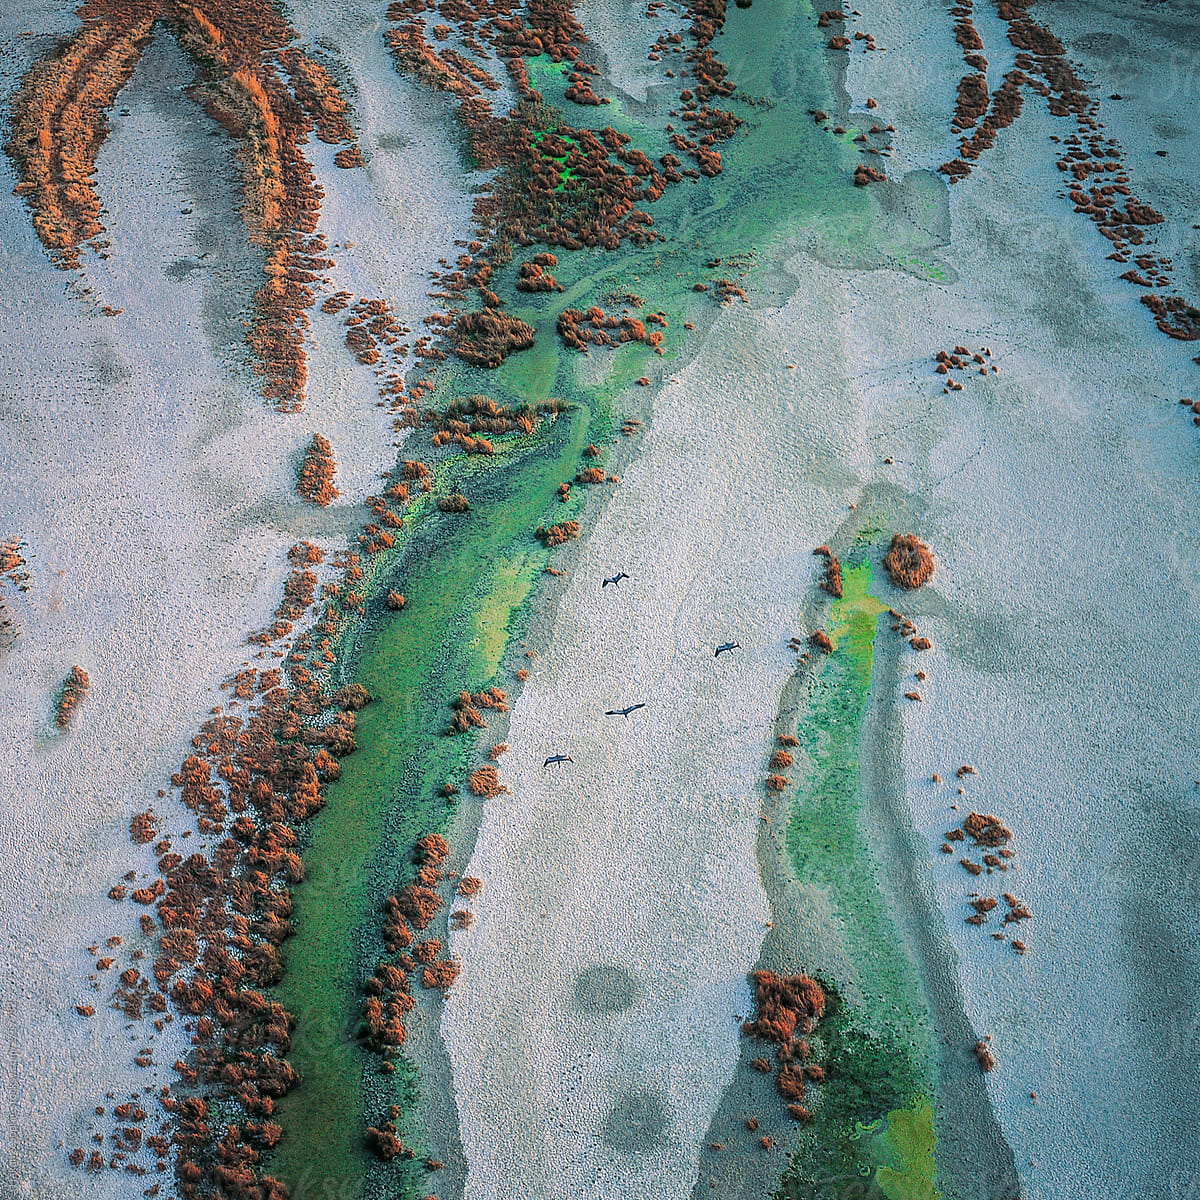 Abstract aerial view of a salt lake